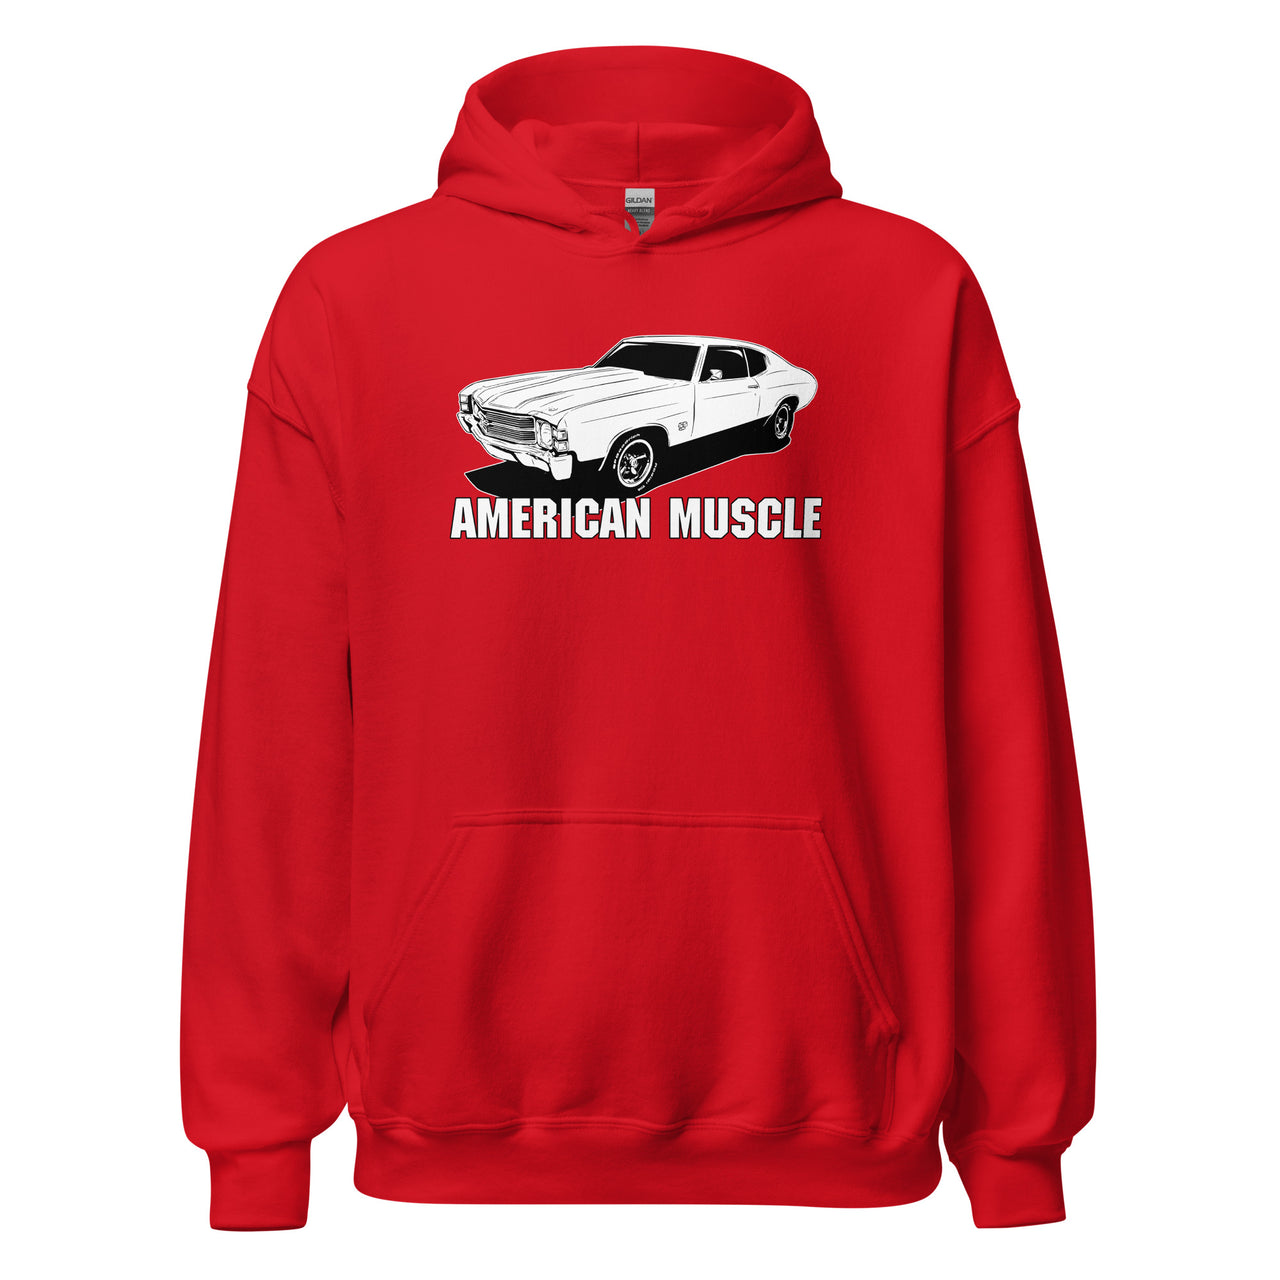 1971 Chevelle Car Hoodie in red